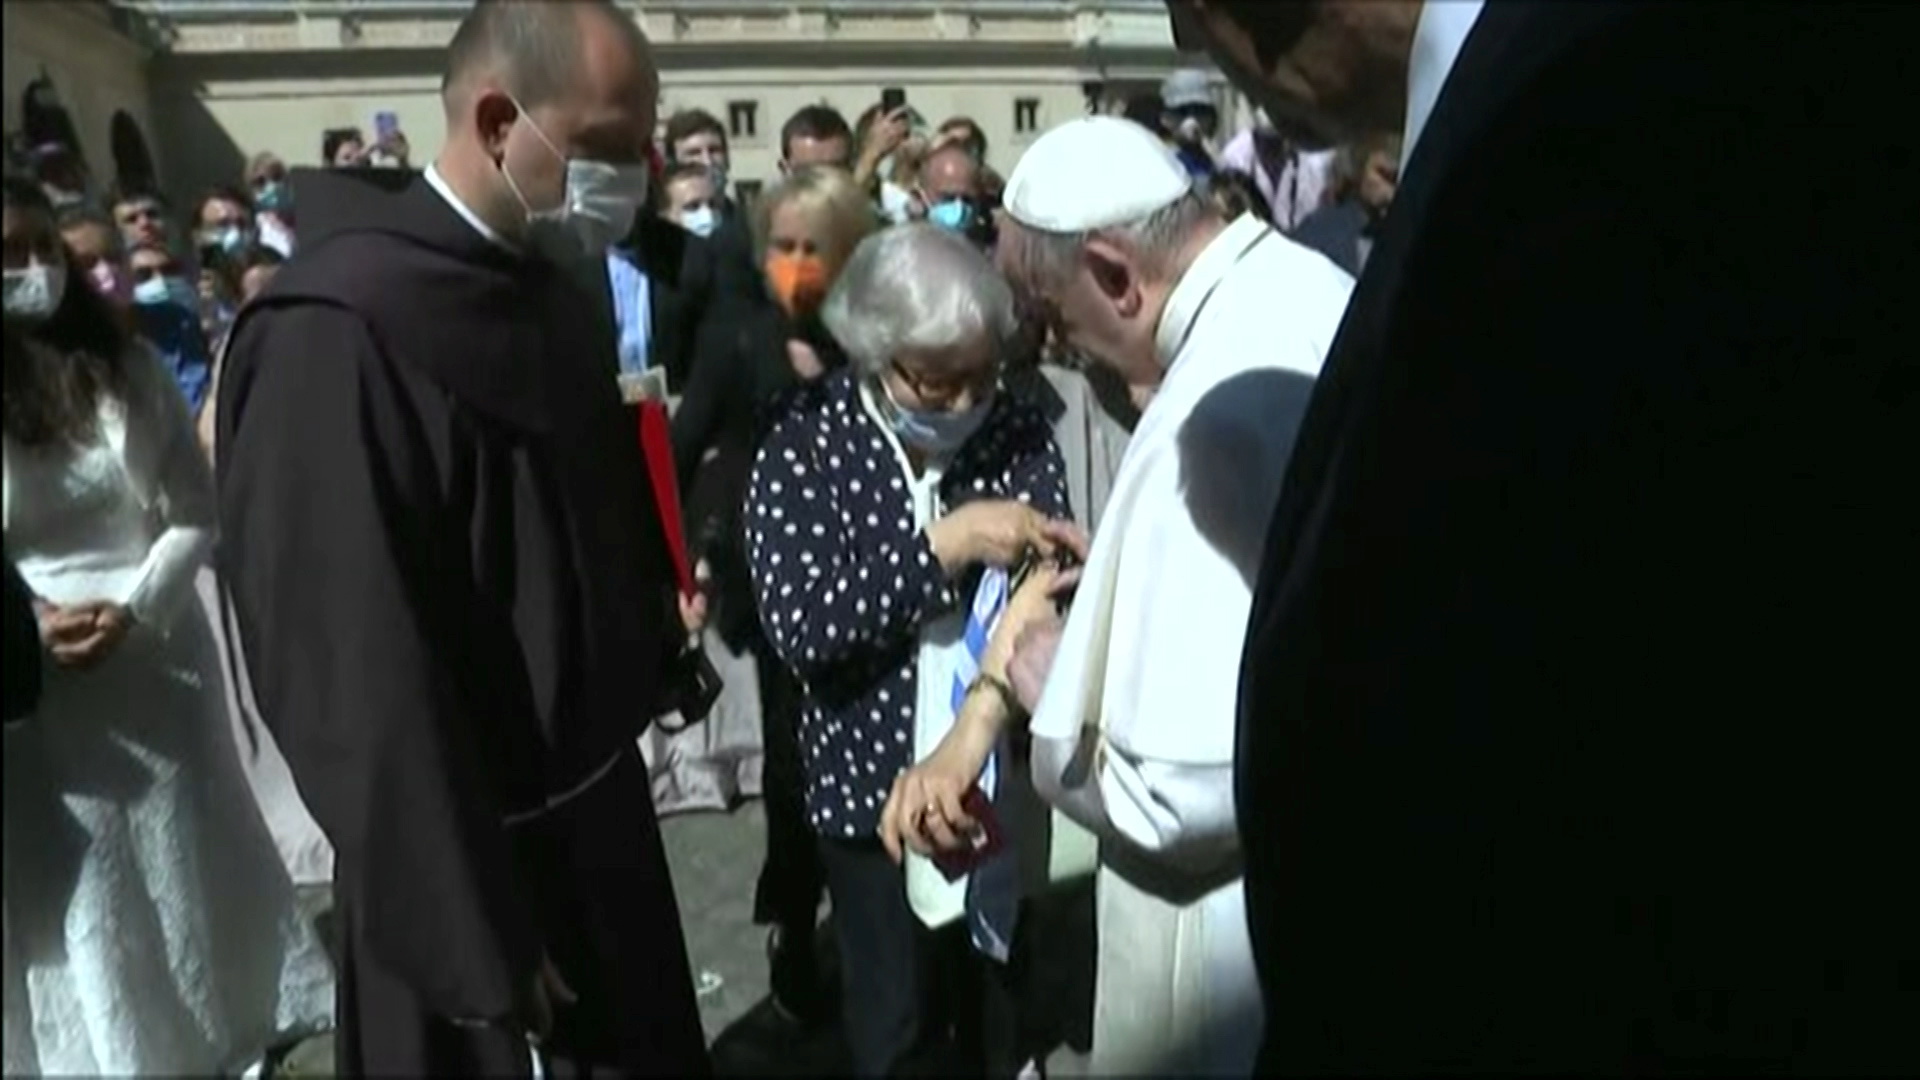 Pope meets Holocaust survivor, kisses concentration camp number tattooed on her arm